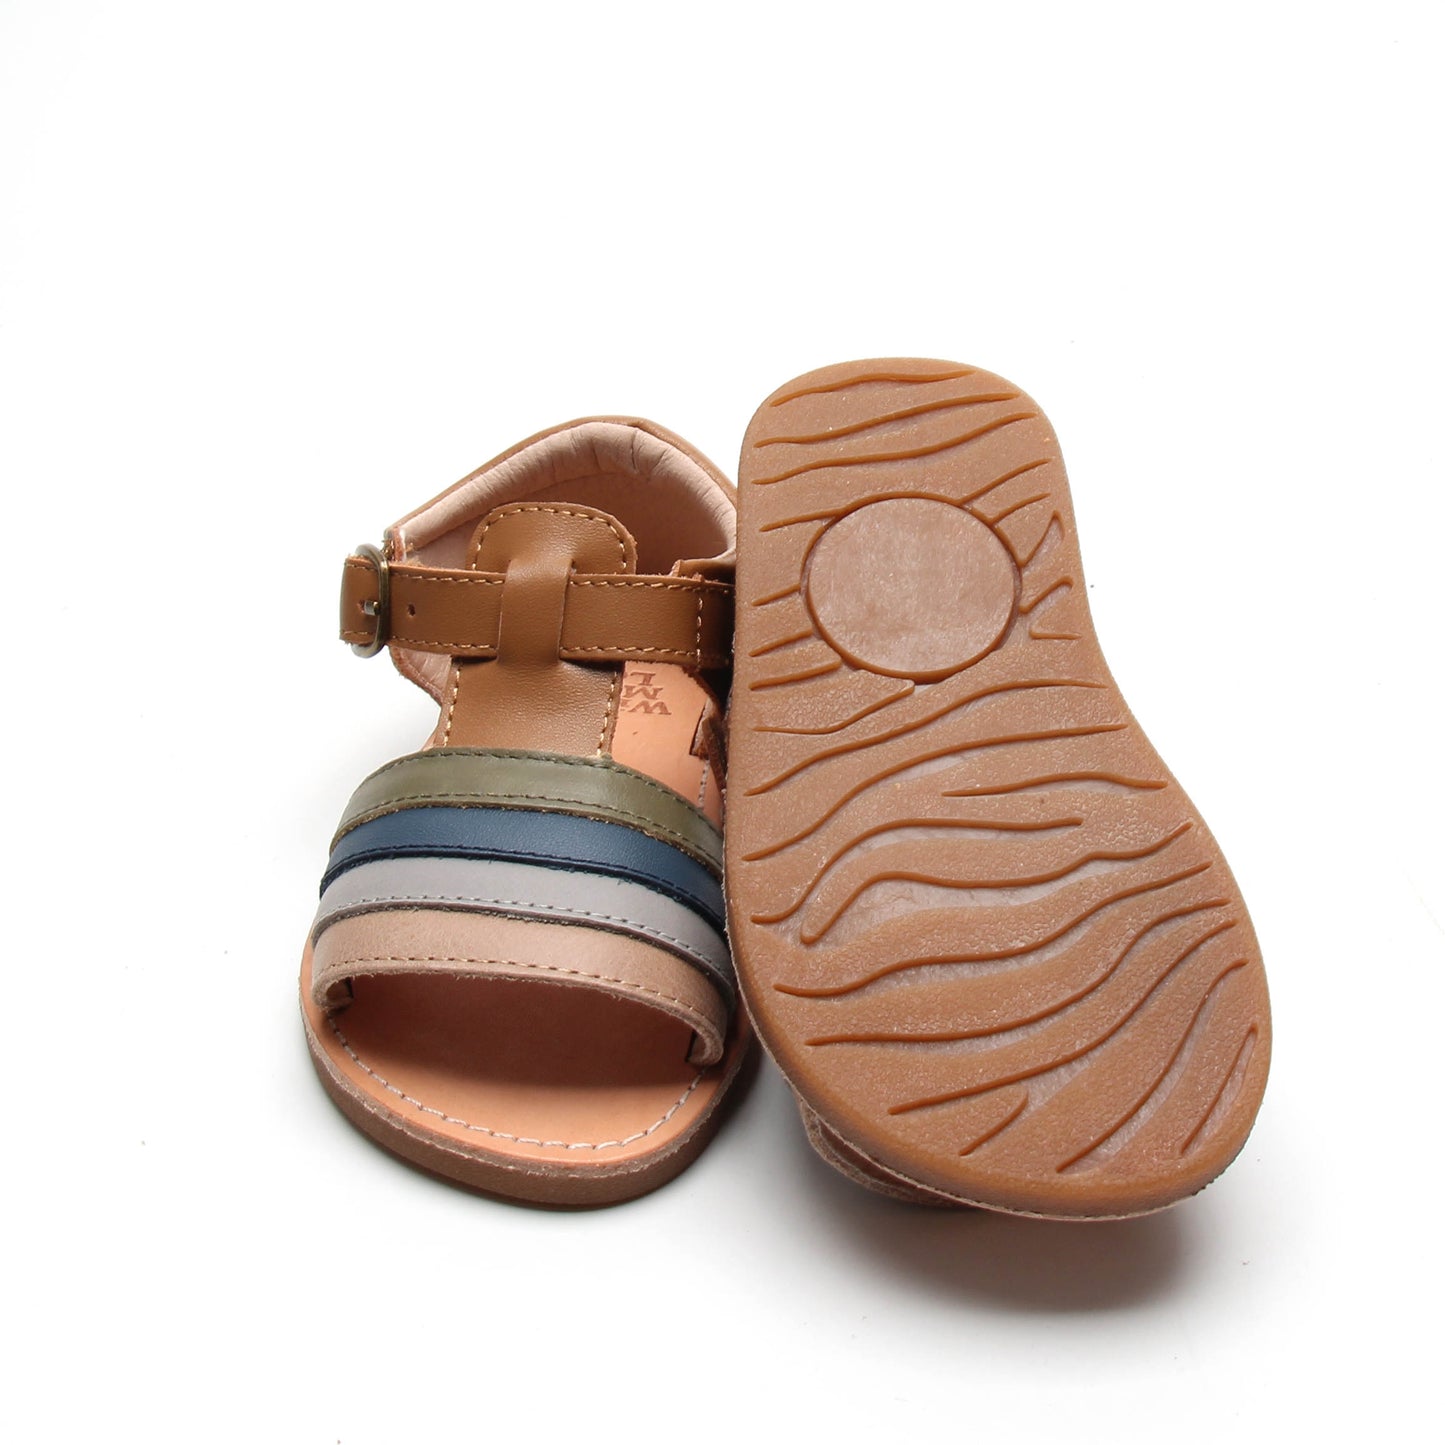 Buds & Blooms Sandals - Thistle